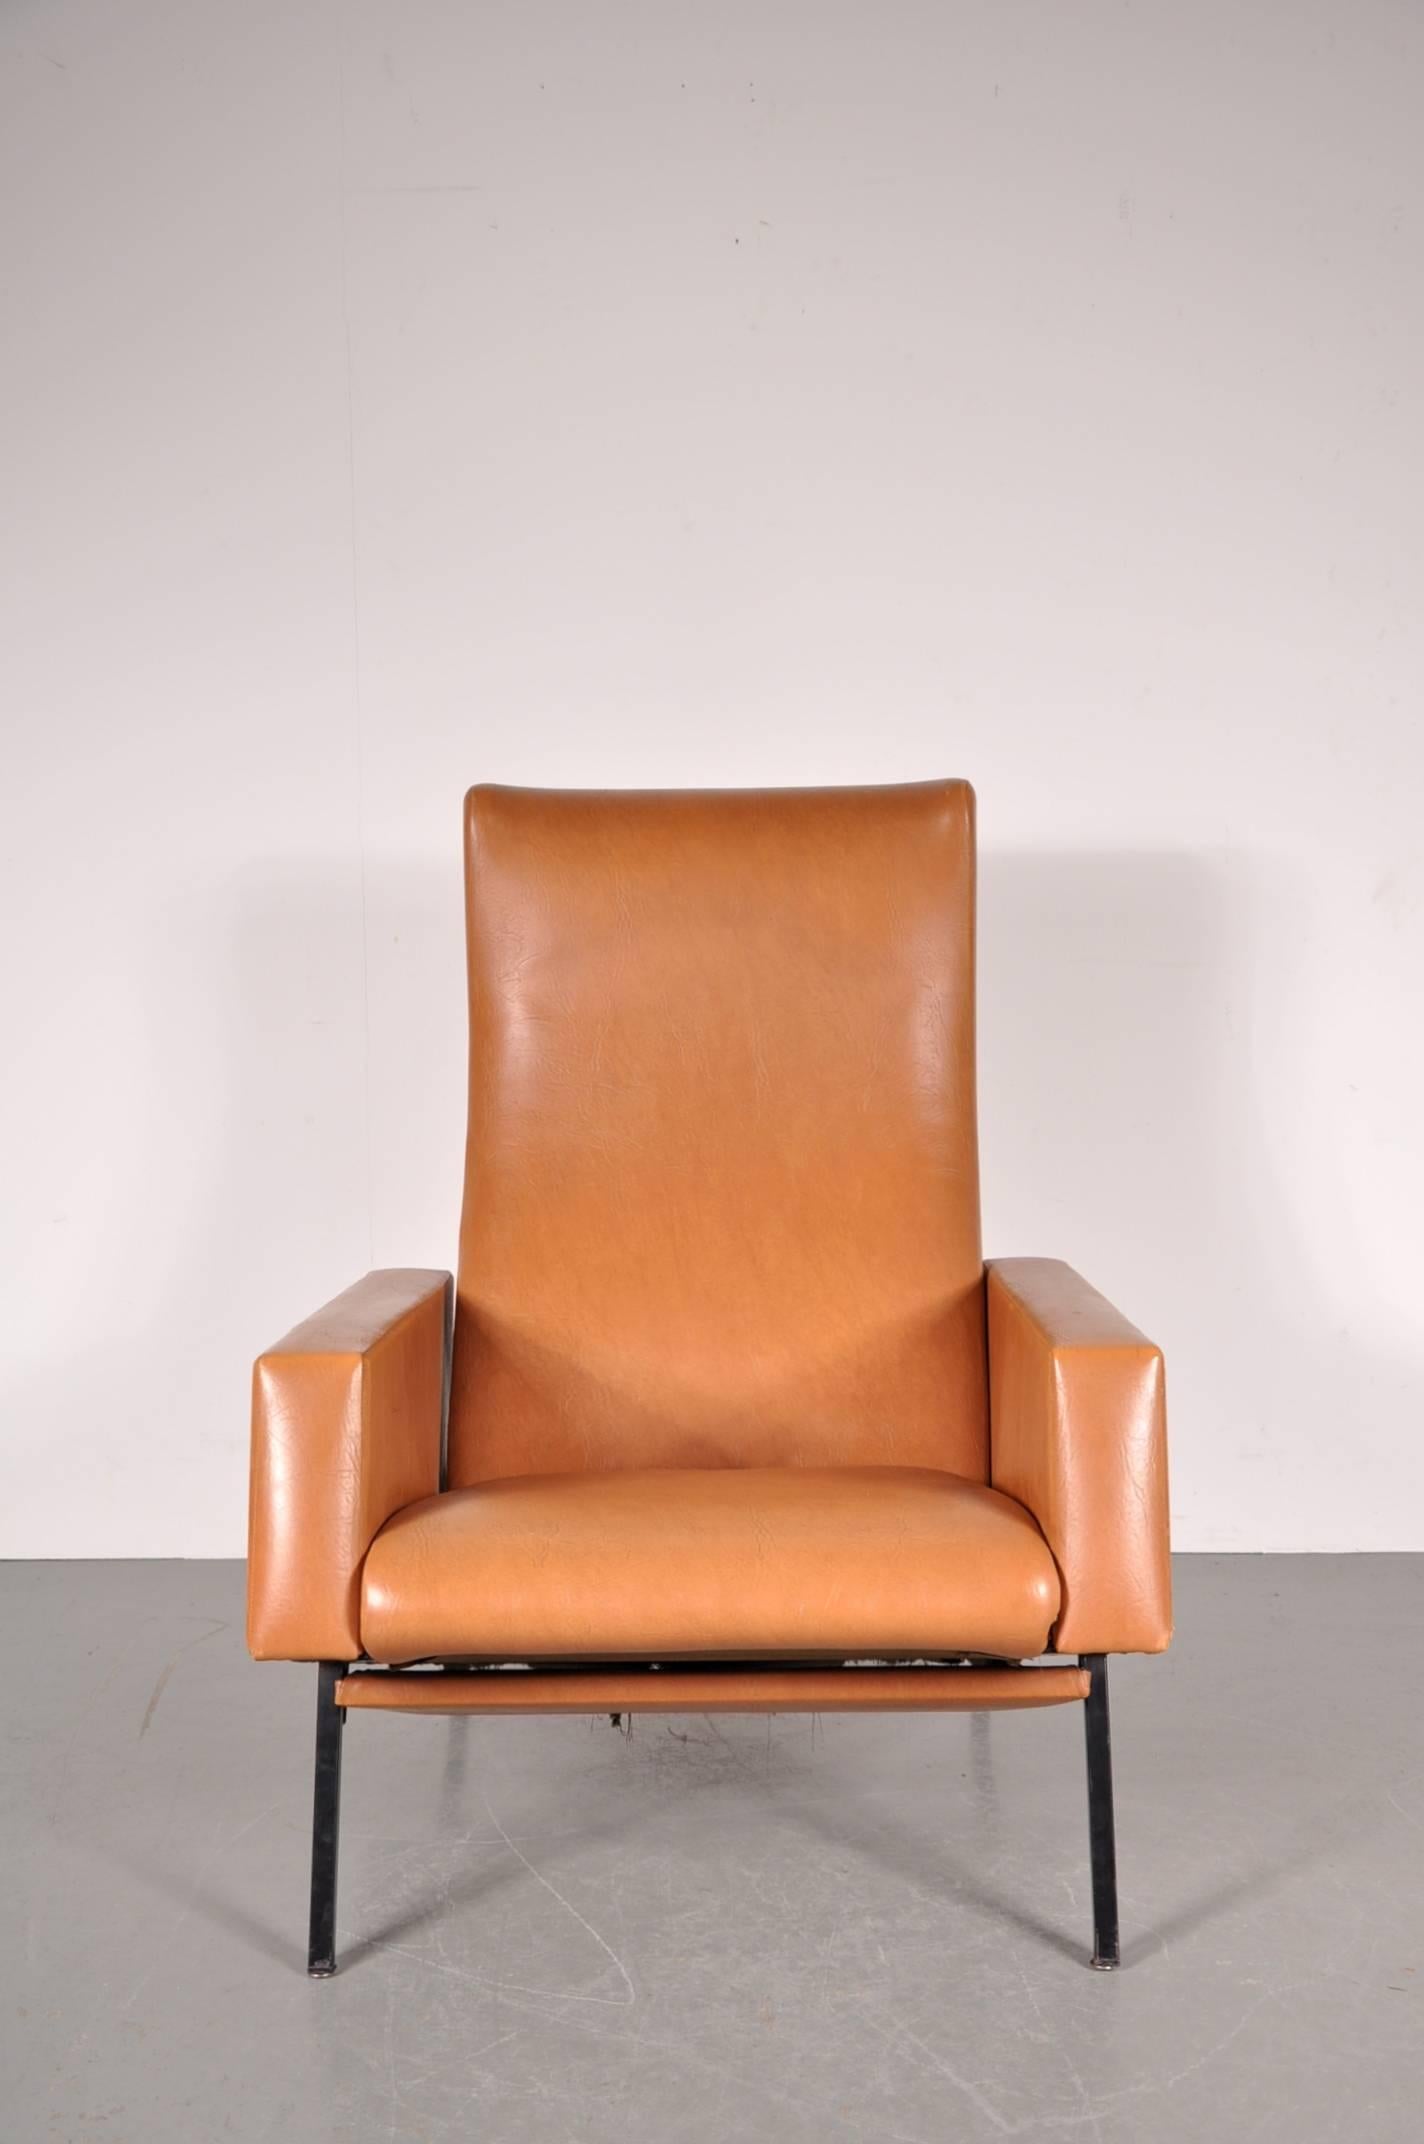 Metal Trelax Chair by Pierre Guariche, Manufactured by Meurop, Belgium, circa 1950